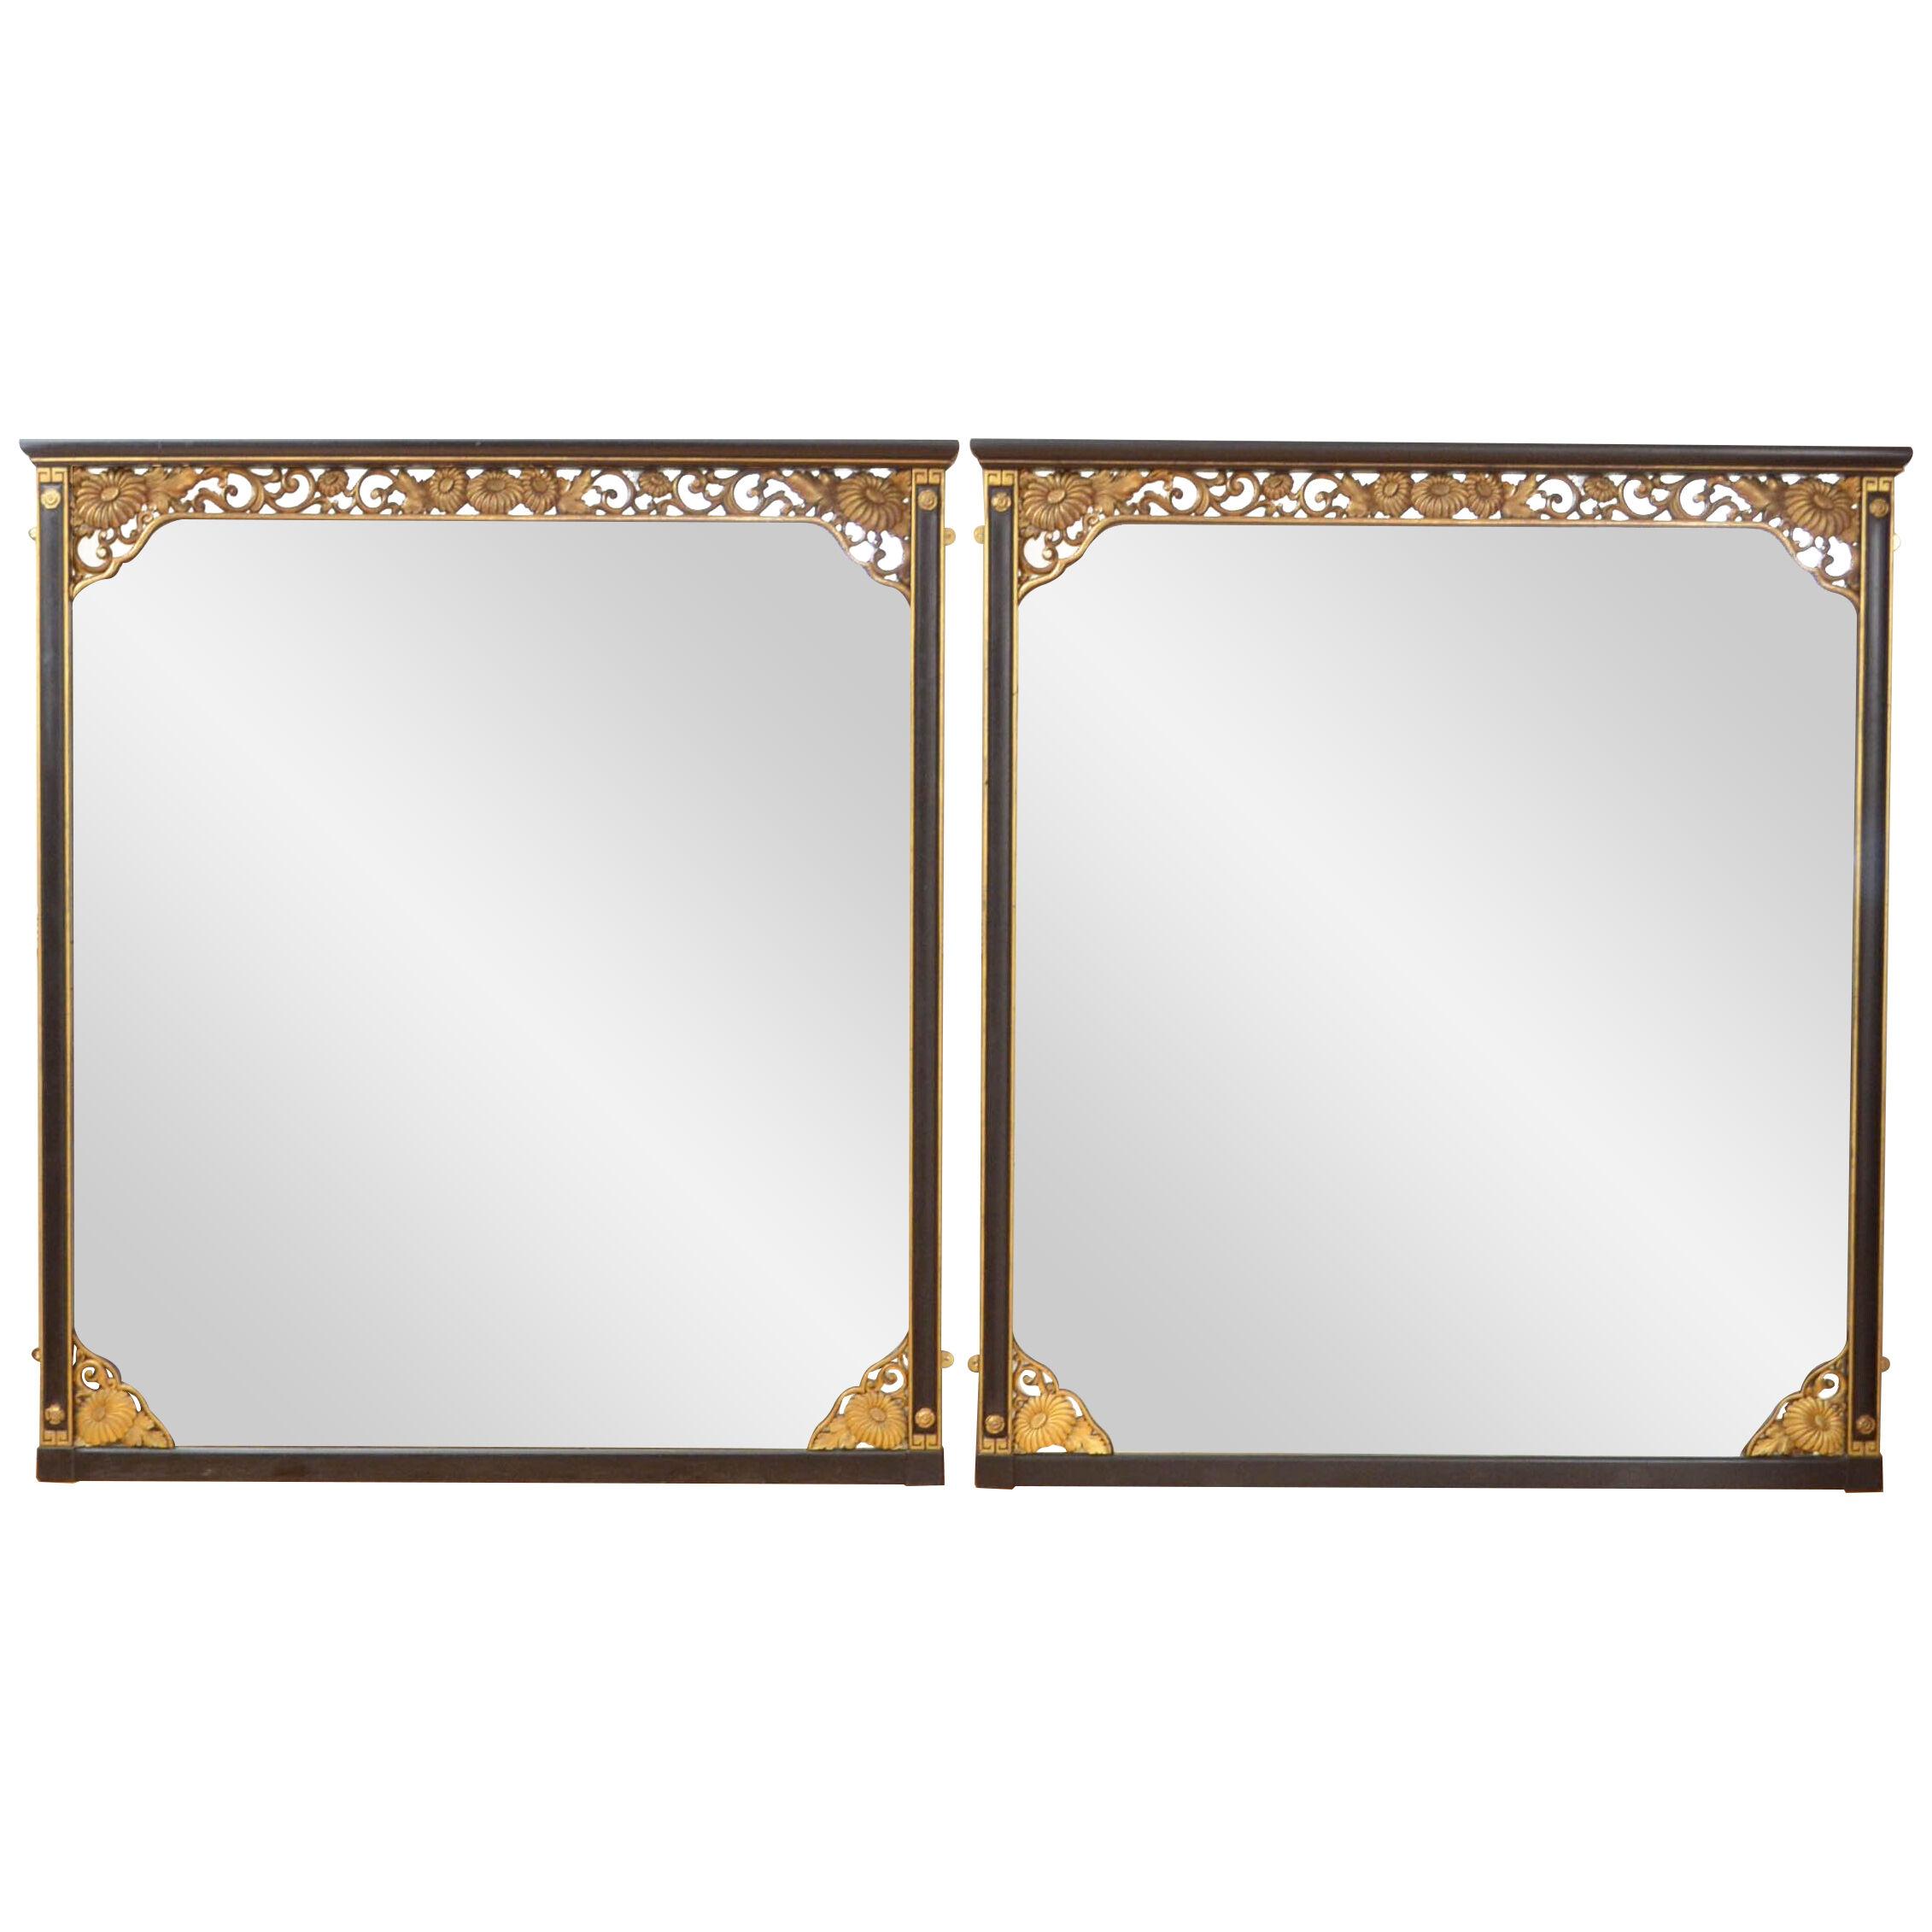 Pair of Antique Wall Mirrors H172cm